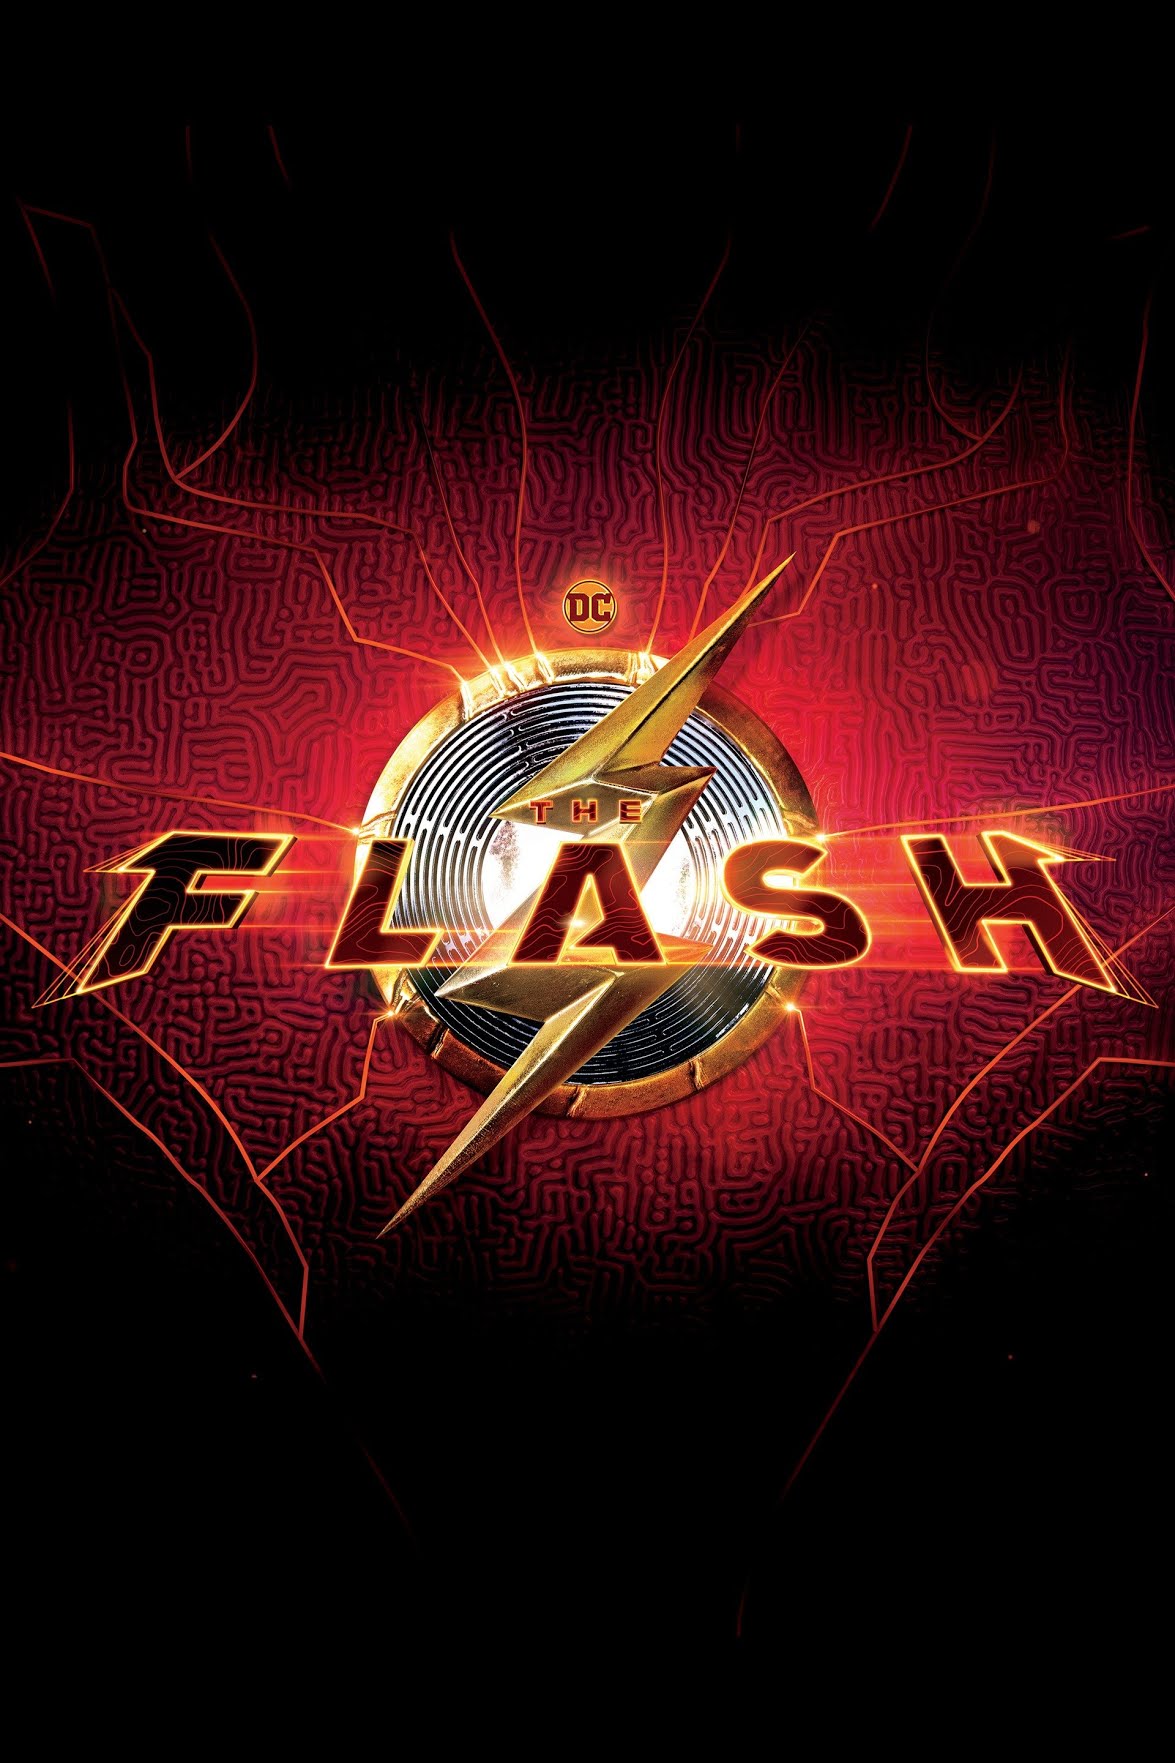 The Flash Movie Release Date, Cast, and Reviews.